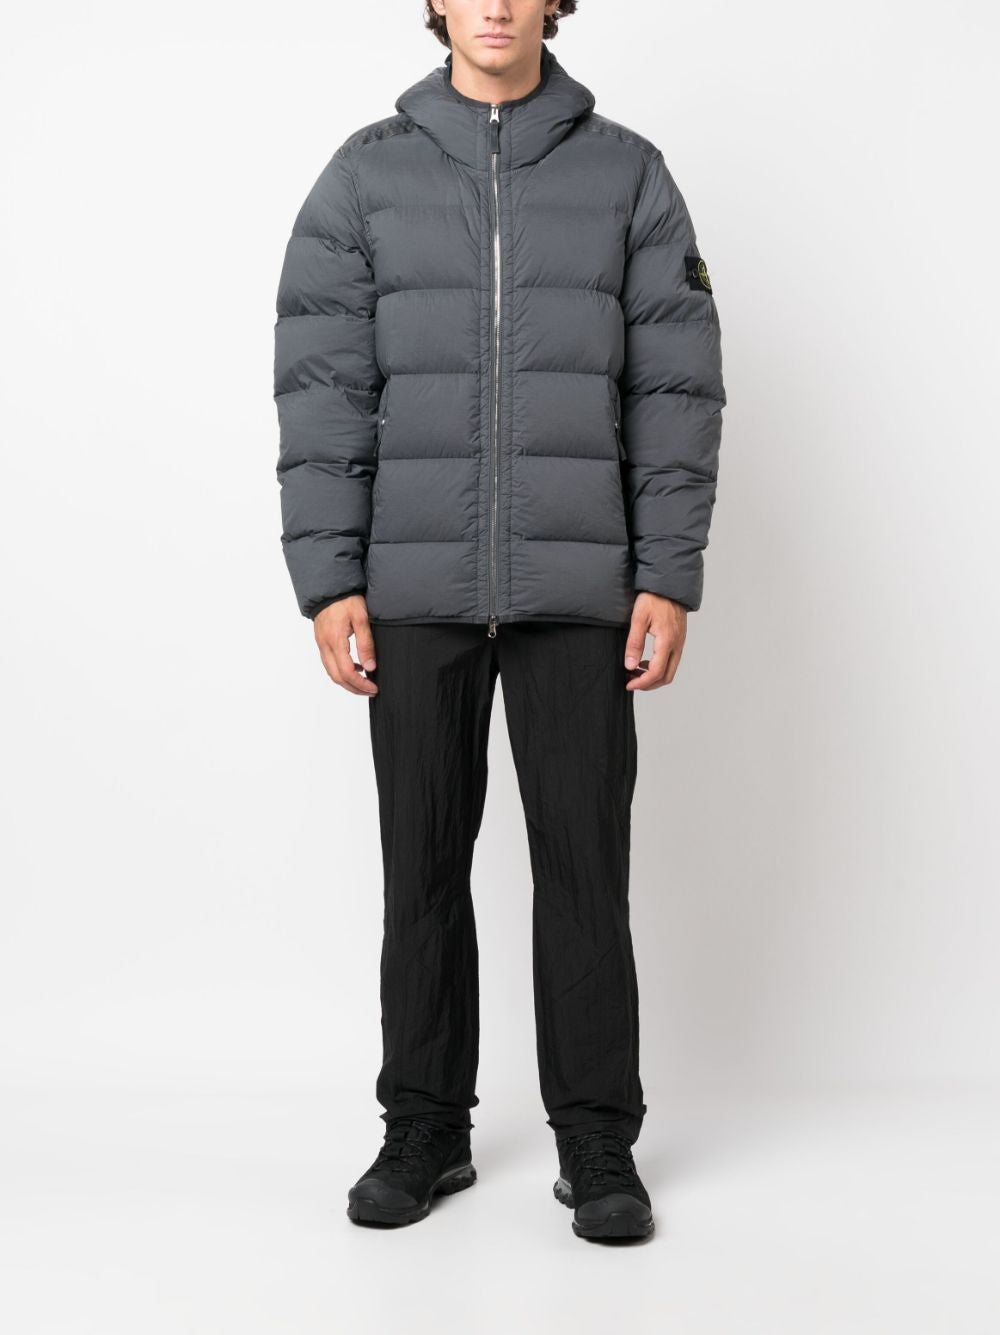 STONE ISLAND Men's Gray Hooded Down Jacket with Removable Logo Patch